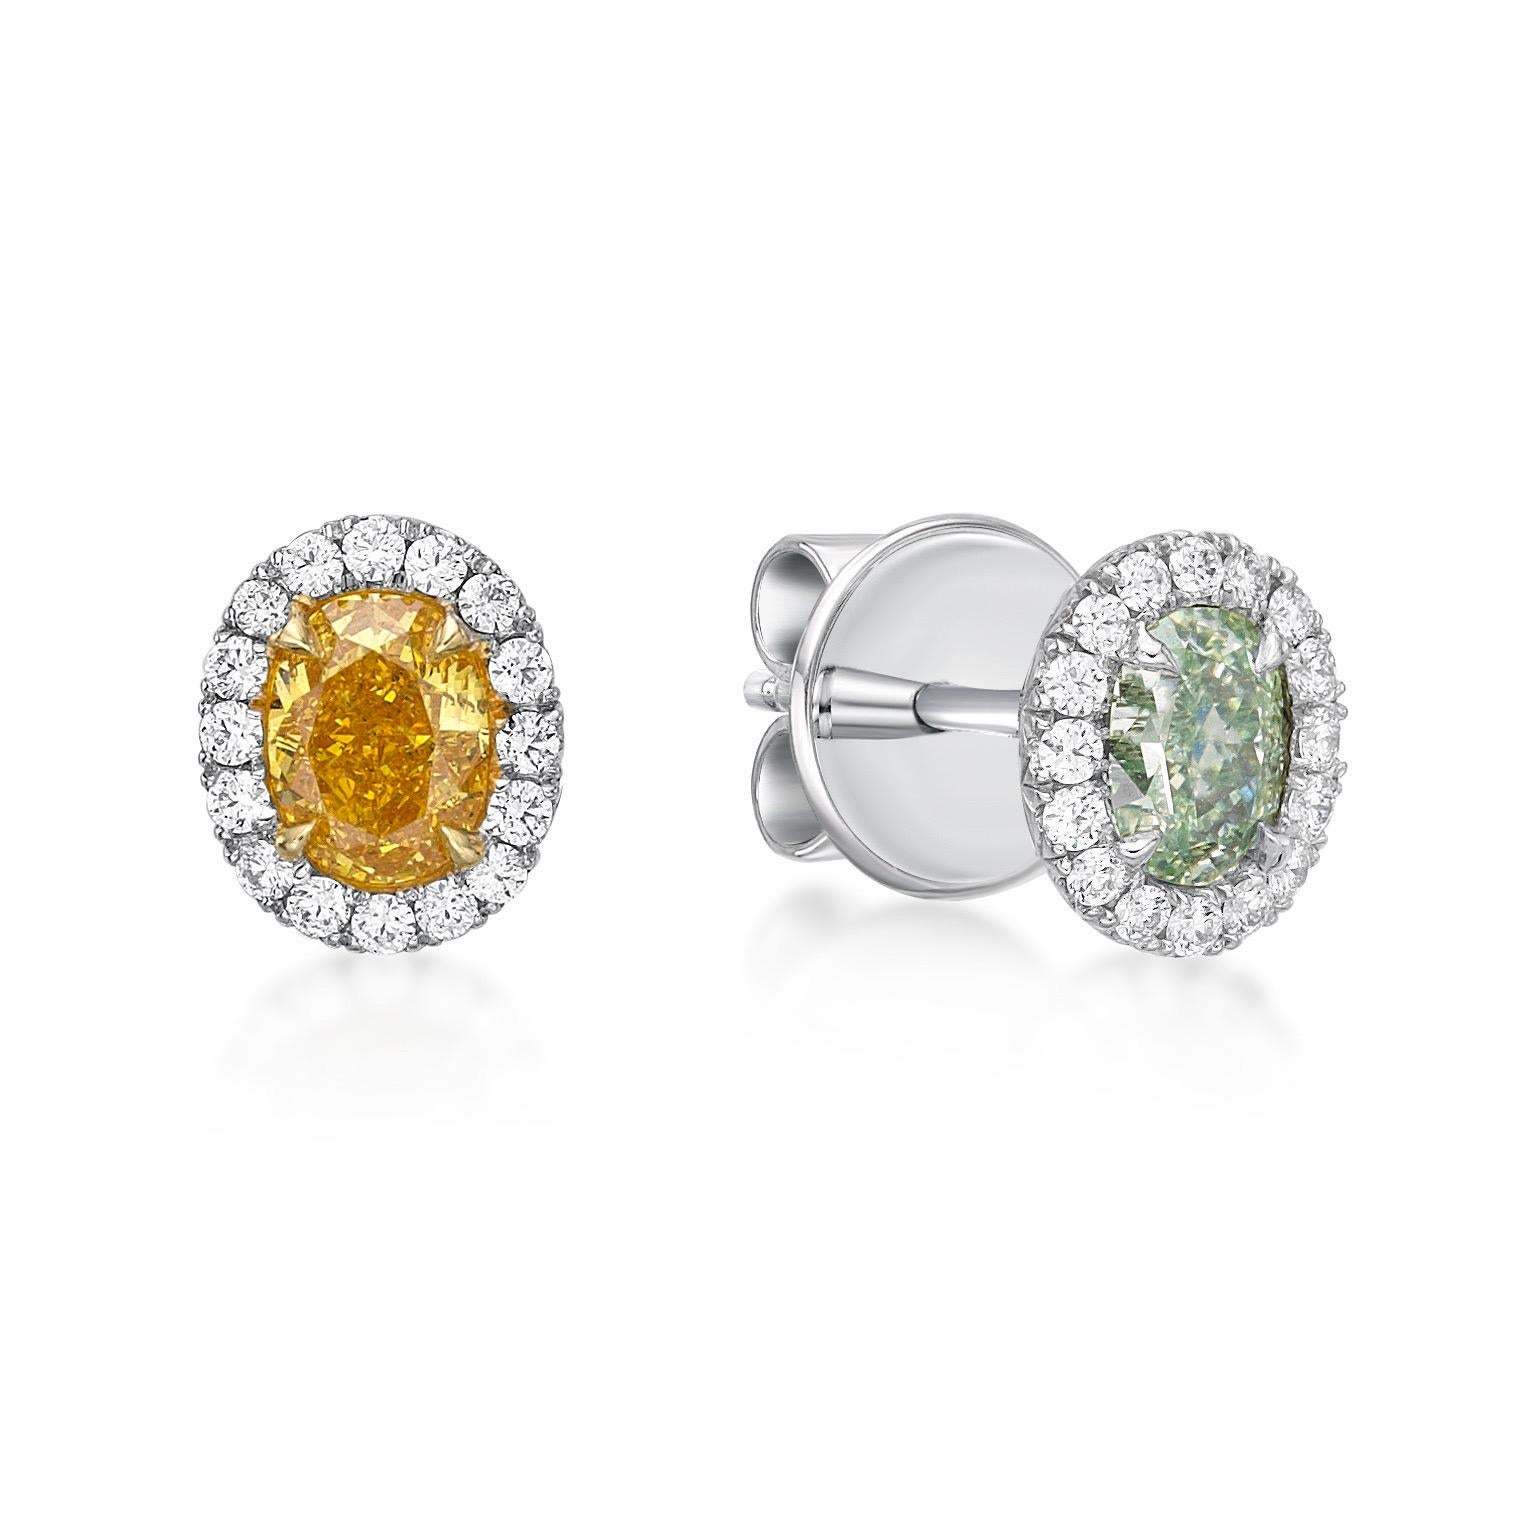 2 natural fancy diamonds featuring an orange and green diamond 0.74ct tw. 
32 small diamonds totaling .17ct 
From The Vault at Emilio Jewelry Located on New York's iconic Fifth Avenue,
Everyday but one of a kind rare studs. Total weight listed in